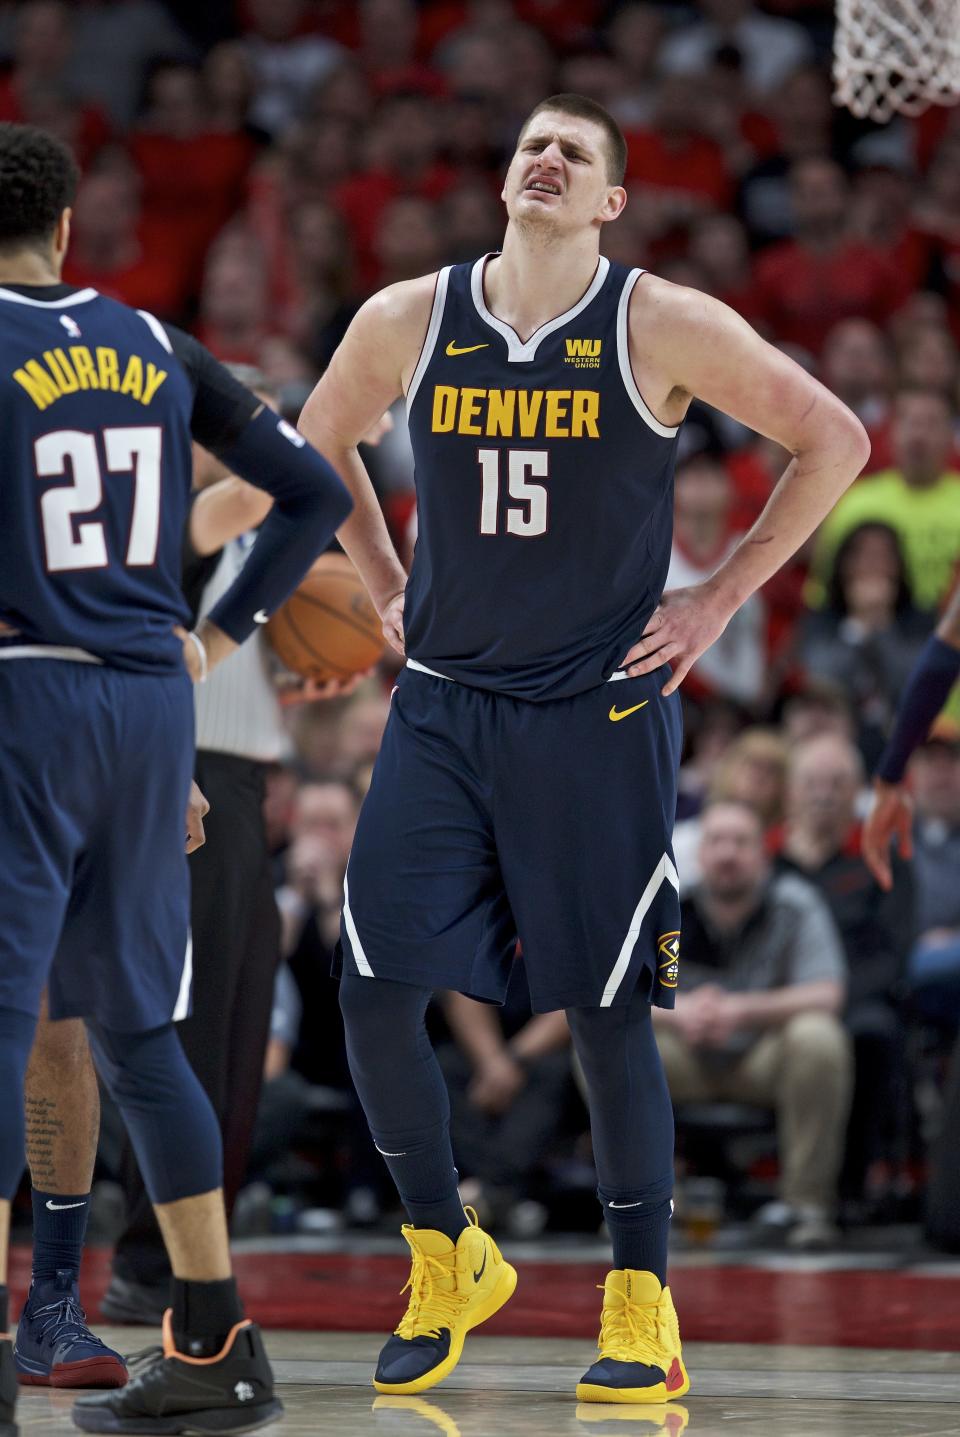 Denver Nuggets center Nikola Jokic grimaces as he walks off the court against the Portland Trail Blazers during the first half of Game 4 of an NBA basketball second-round playoff series, Sunday, May 5, 2019, in Portland, Ore. The Nuggets won 116-112. (AP Photo/Craig Mitchelldyer)